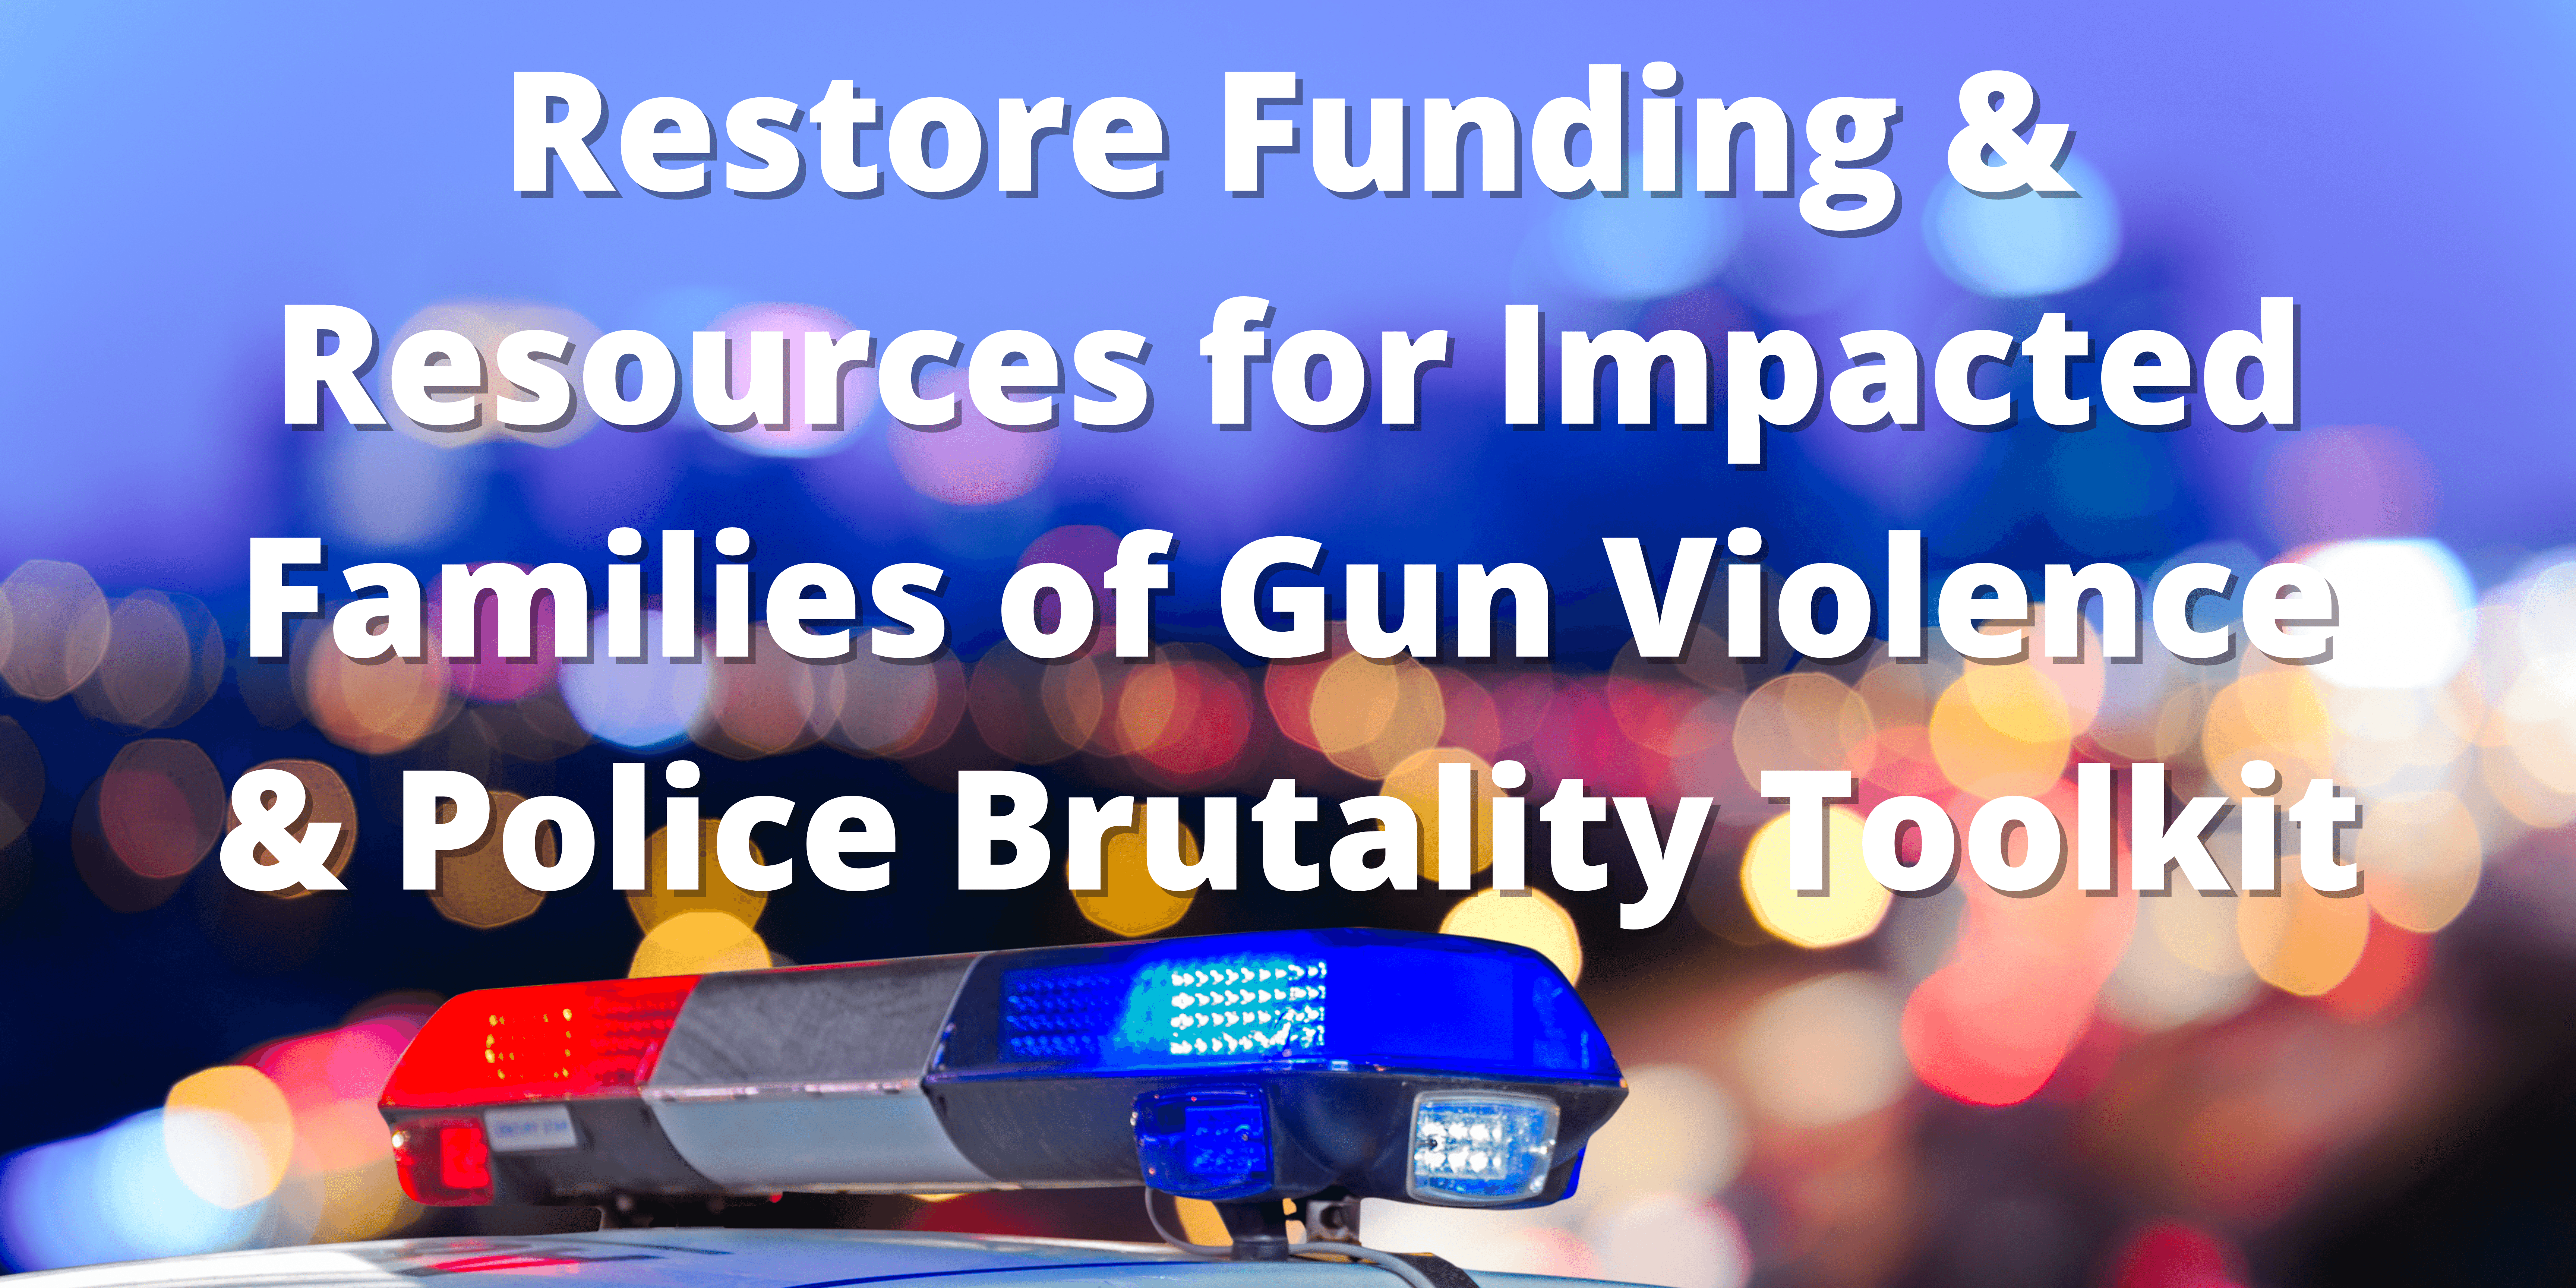 Restore Funding & Resources for Impacted Families of Gun Violence & Police Brutality Toolkit